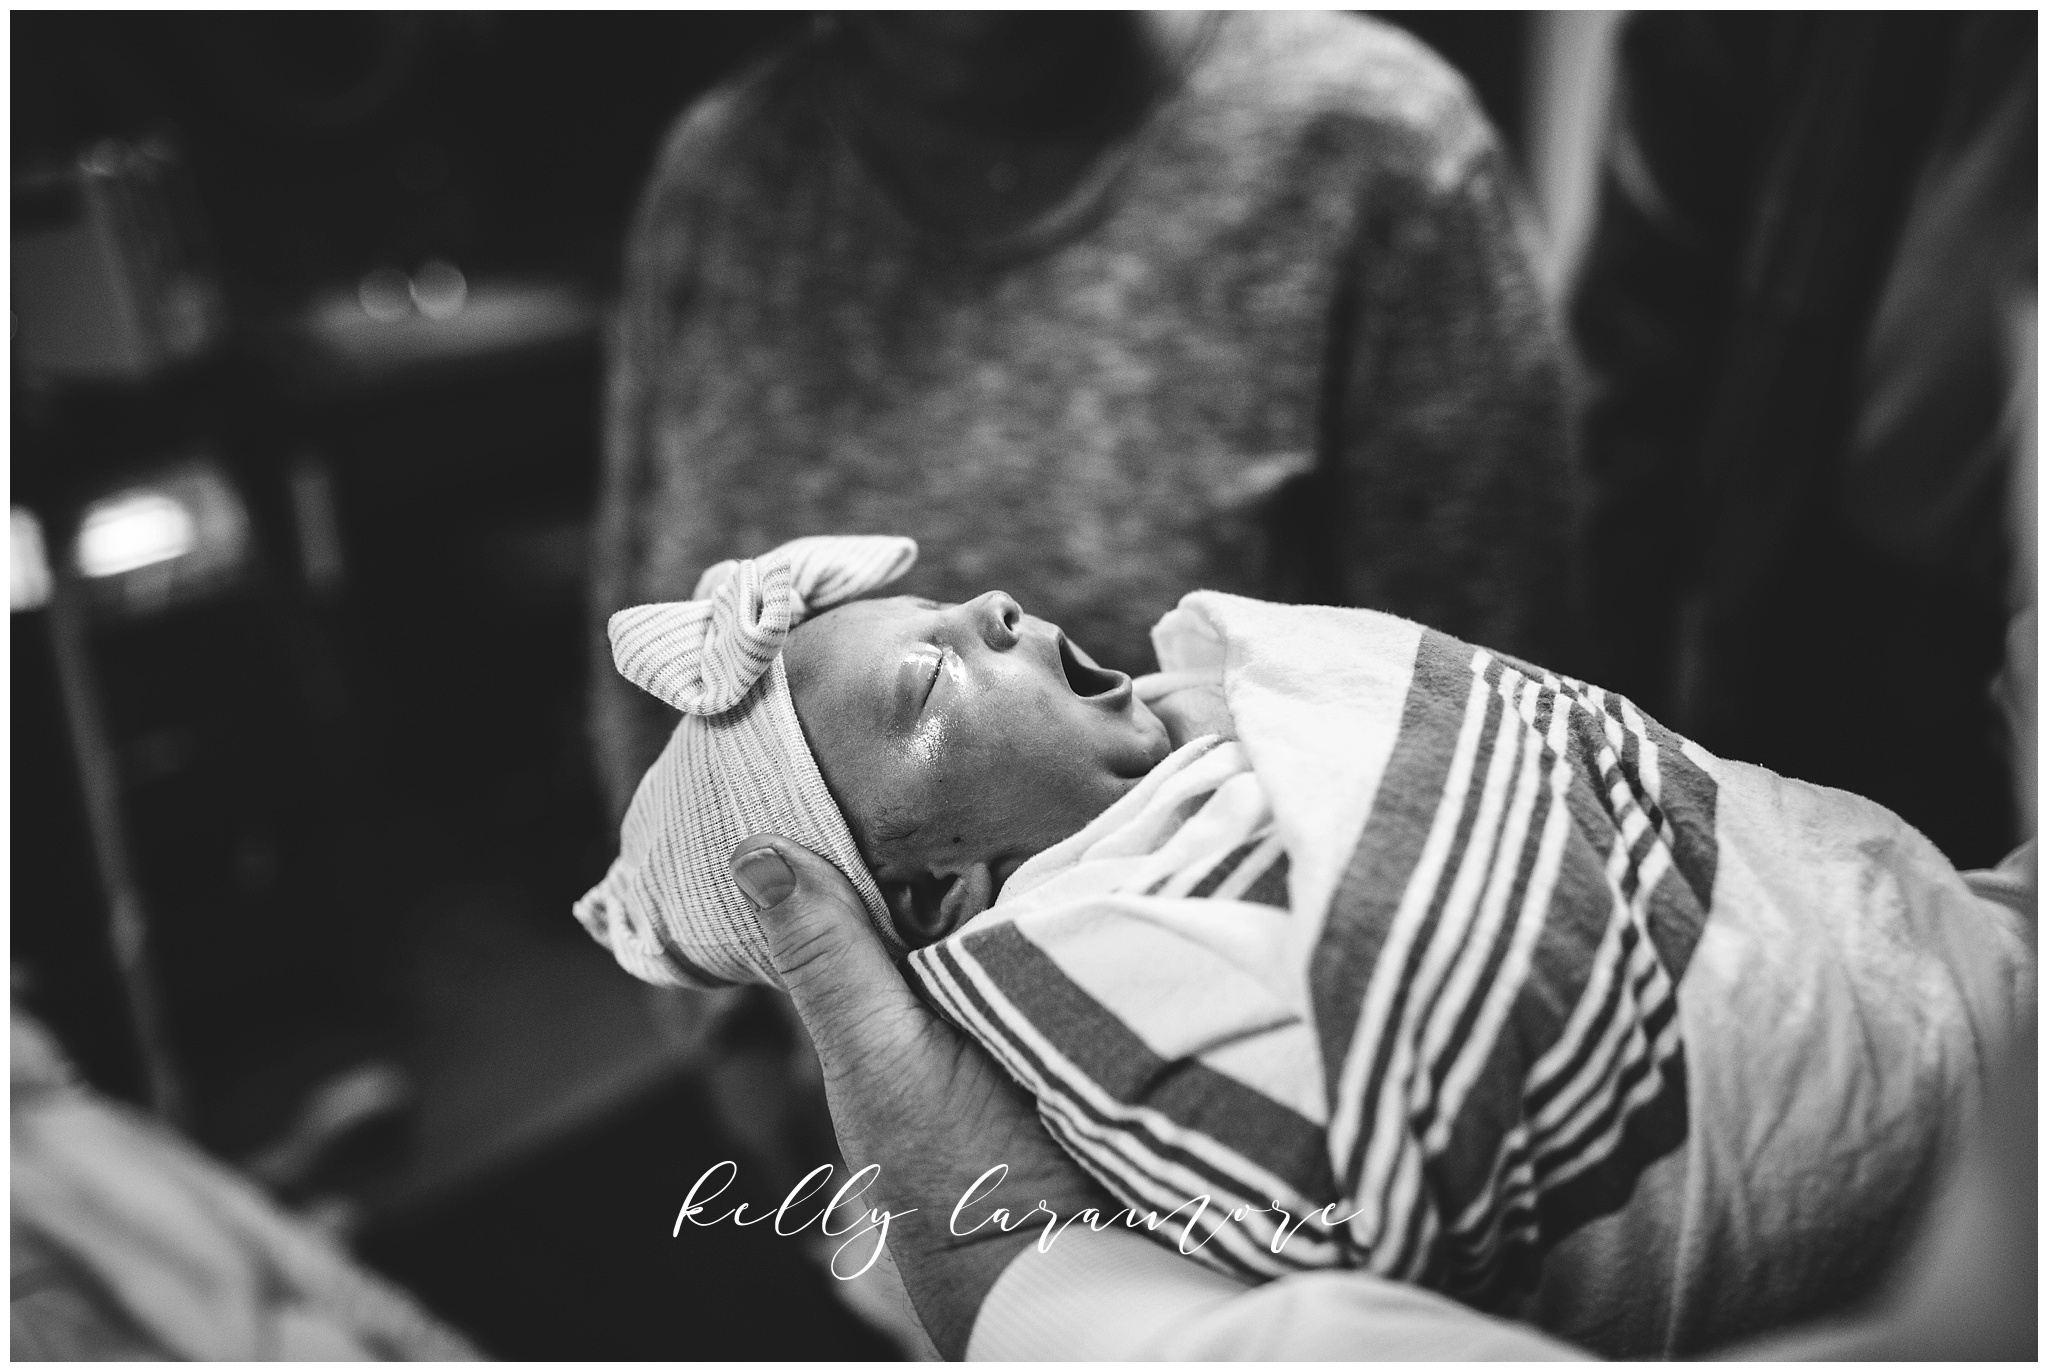 st louis birth story photographer, st louis family photographer, missouri baptist birth center birth, delivery room, baby yawn